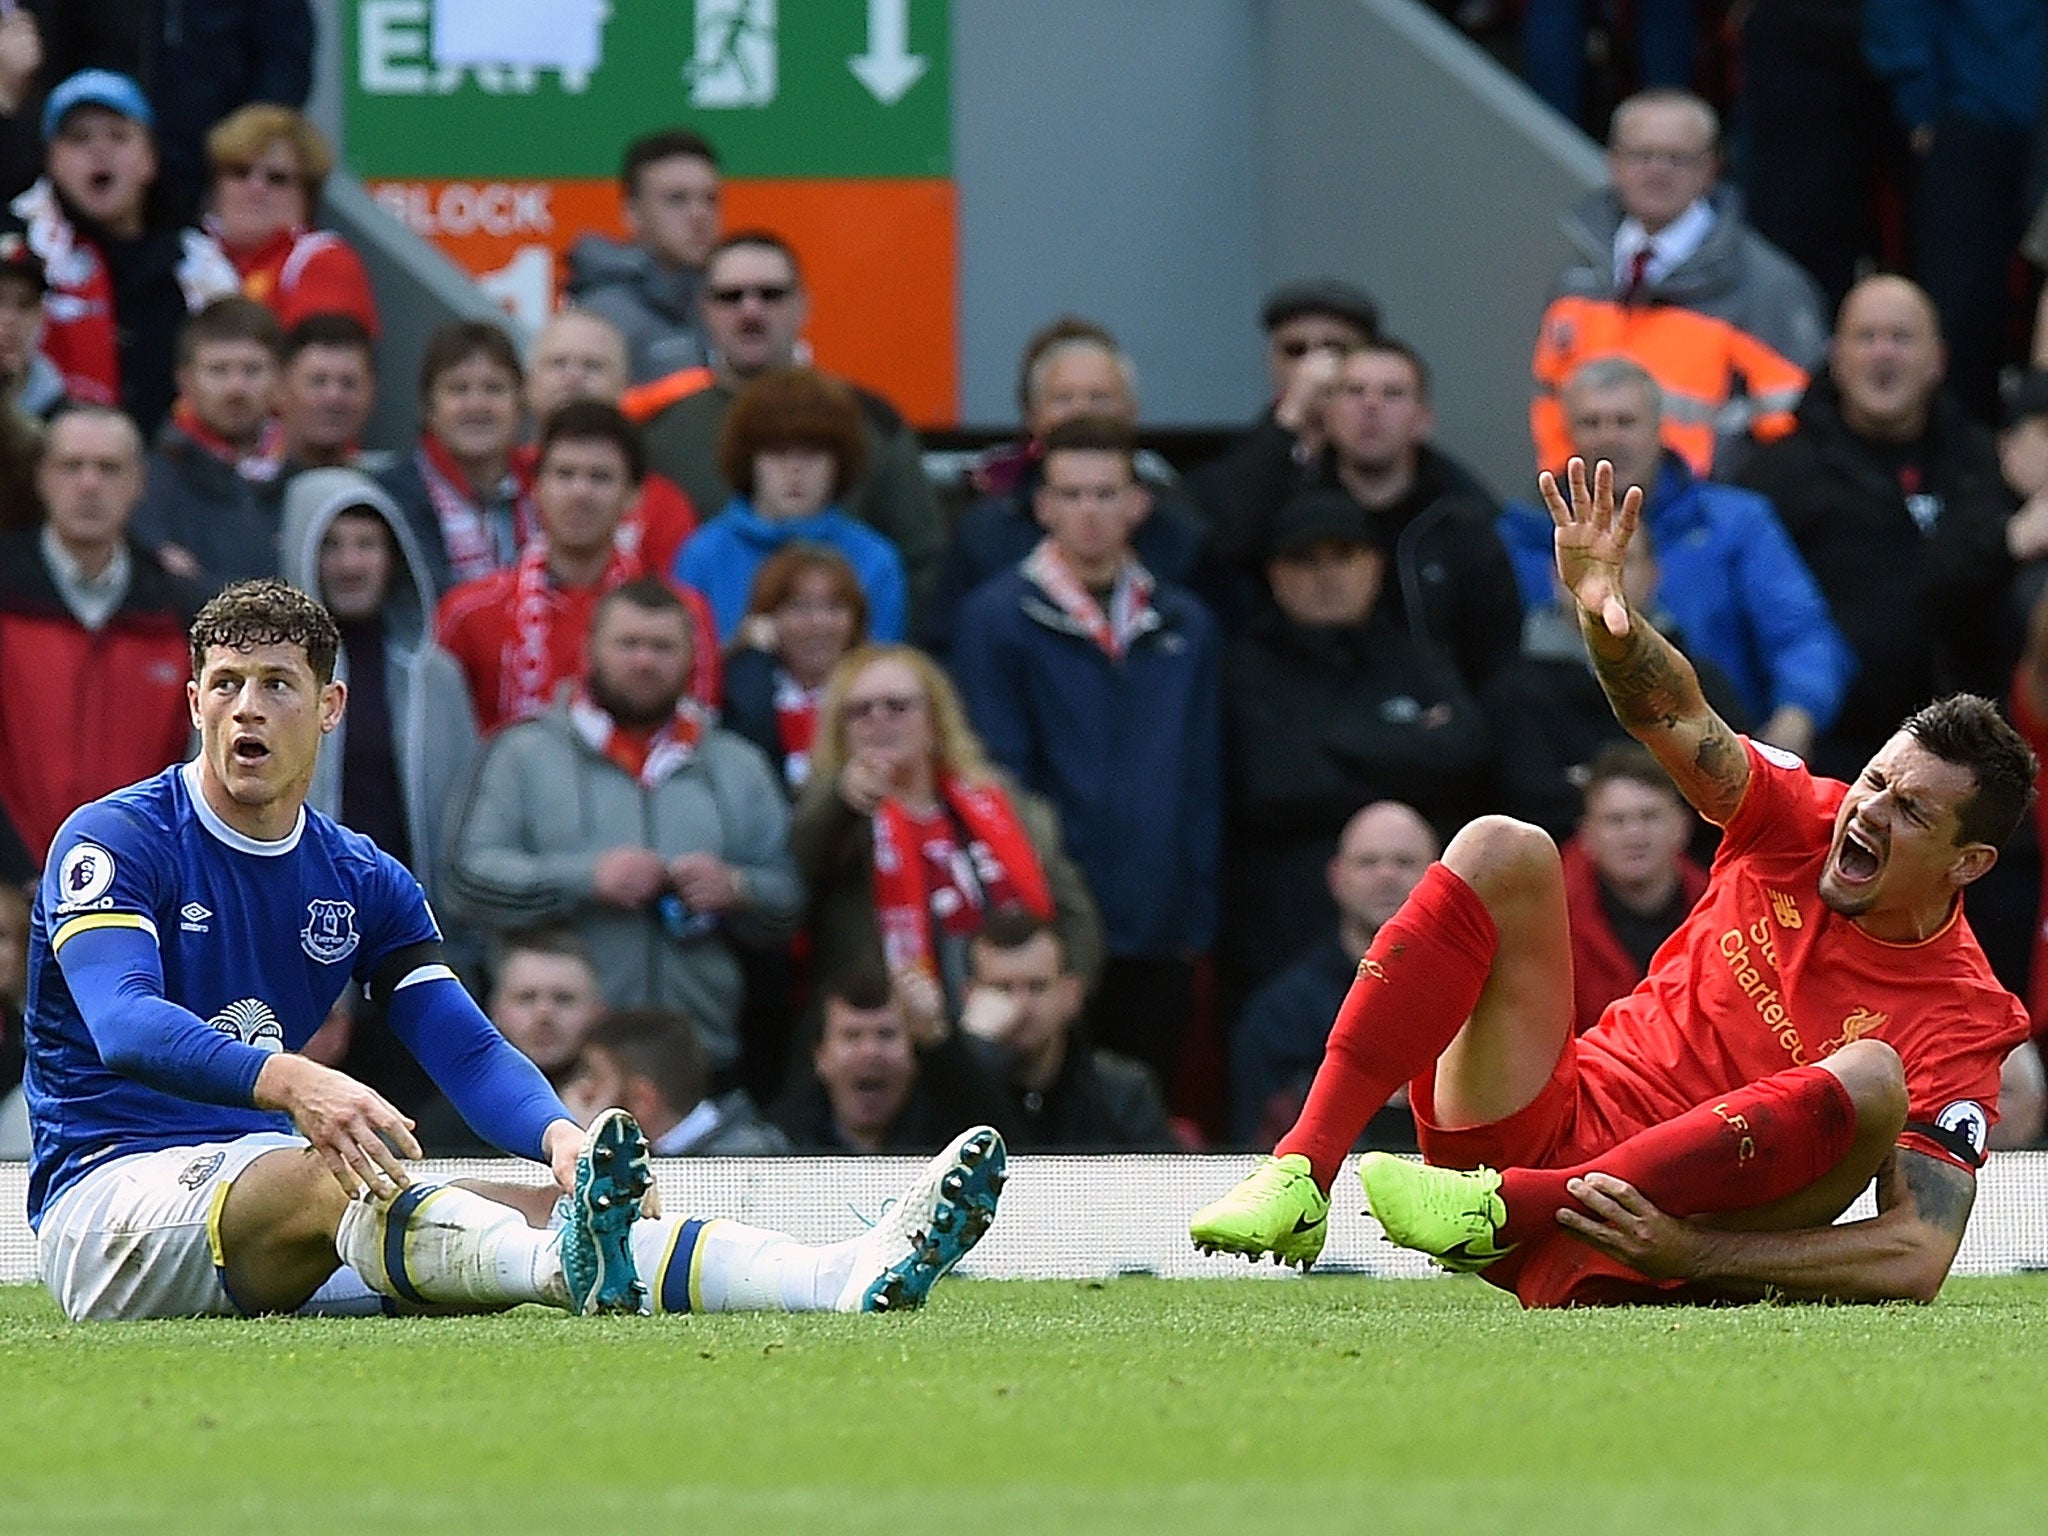 Dejan Lovren wanted an apology from Ross Barkley after his challenge